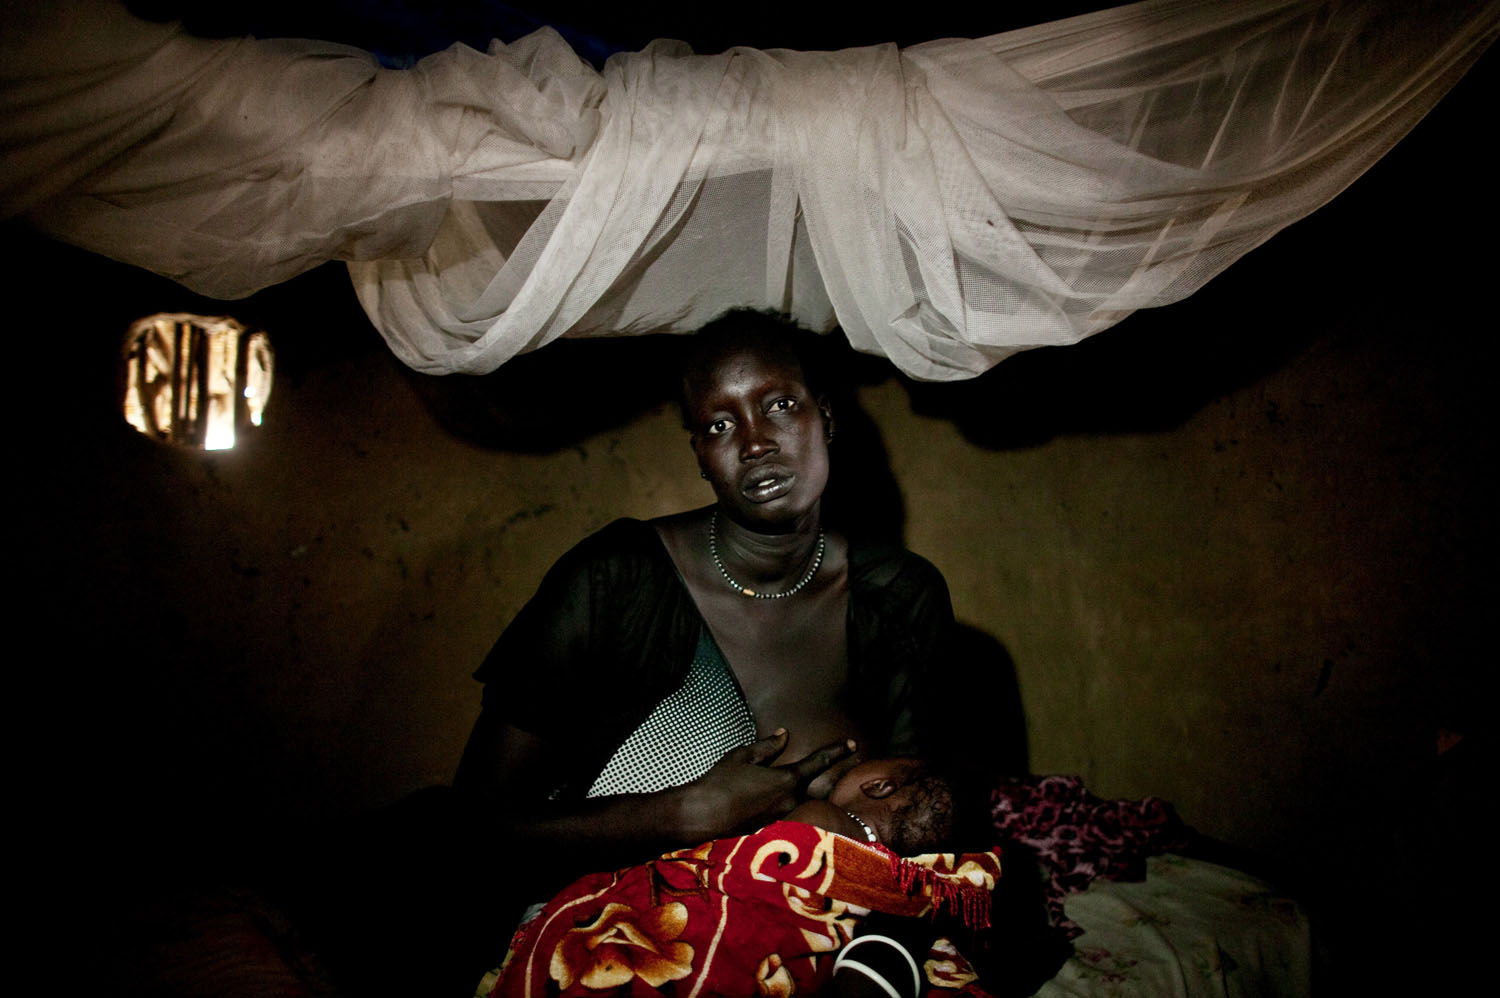 A survivor of a massacre in Fangak, southern Sudan on Thursday, April 7, 2011. The massacre occurred when forces loyal to rebel General George Athor attacked the to town of Fangak on Feb 9th and 10th, 2011. When the fighting ended, more than 200 people were dead, many of whom were civilians.